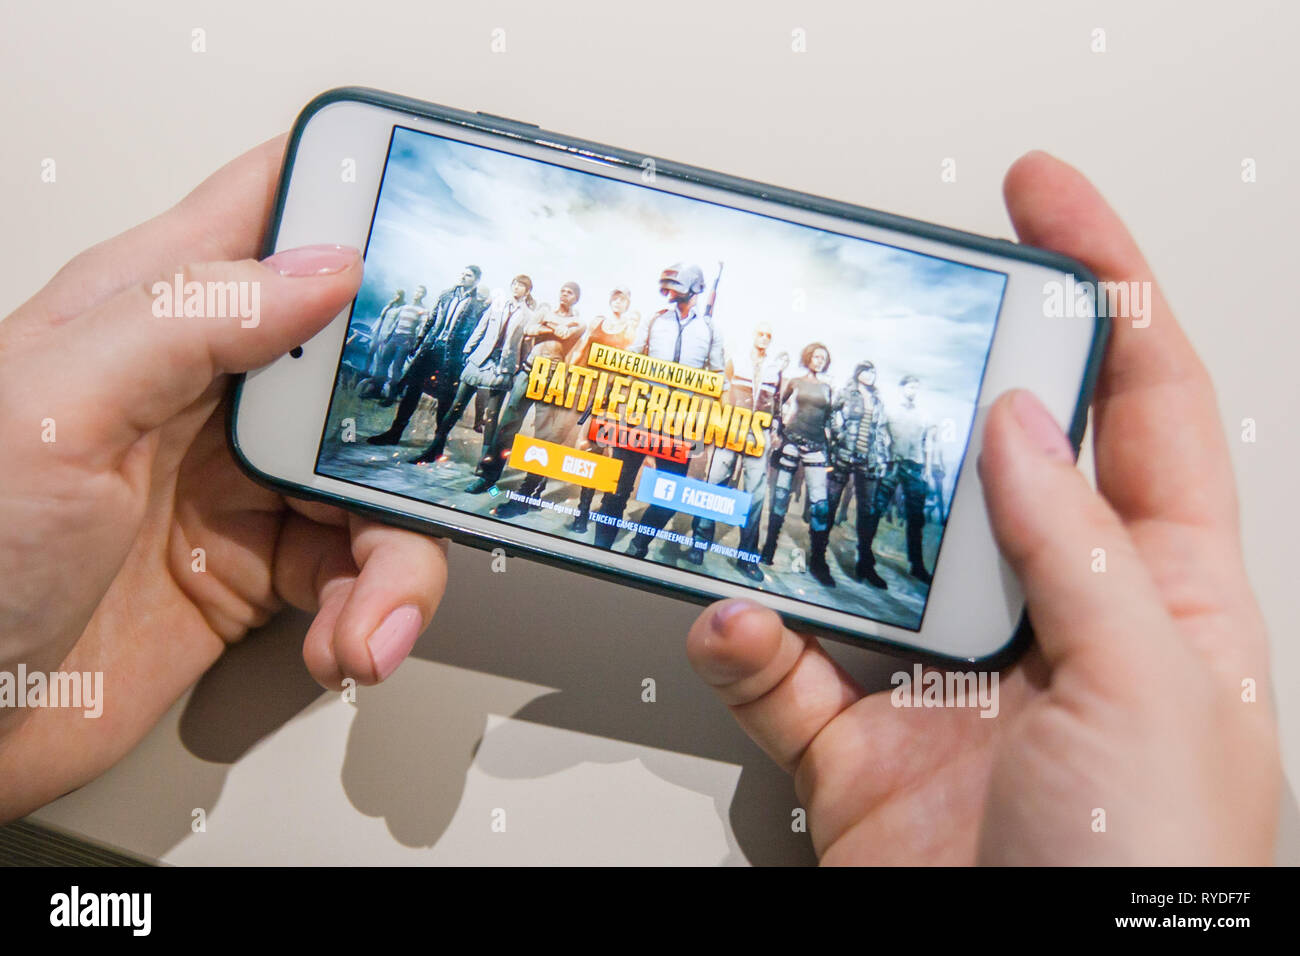 Los Angeles, California, USA - 25 February 2019: Hands holding a smartphone with PUBG Player Unknowns Battlegrounds game on screen, Illustrative Edito Stock Photo